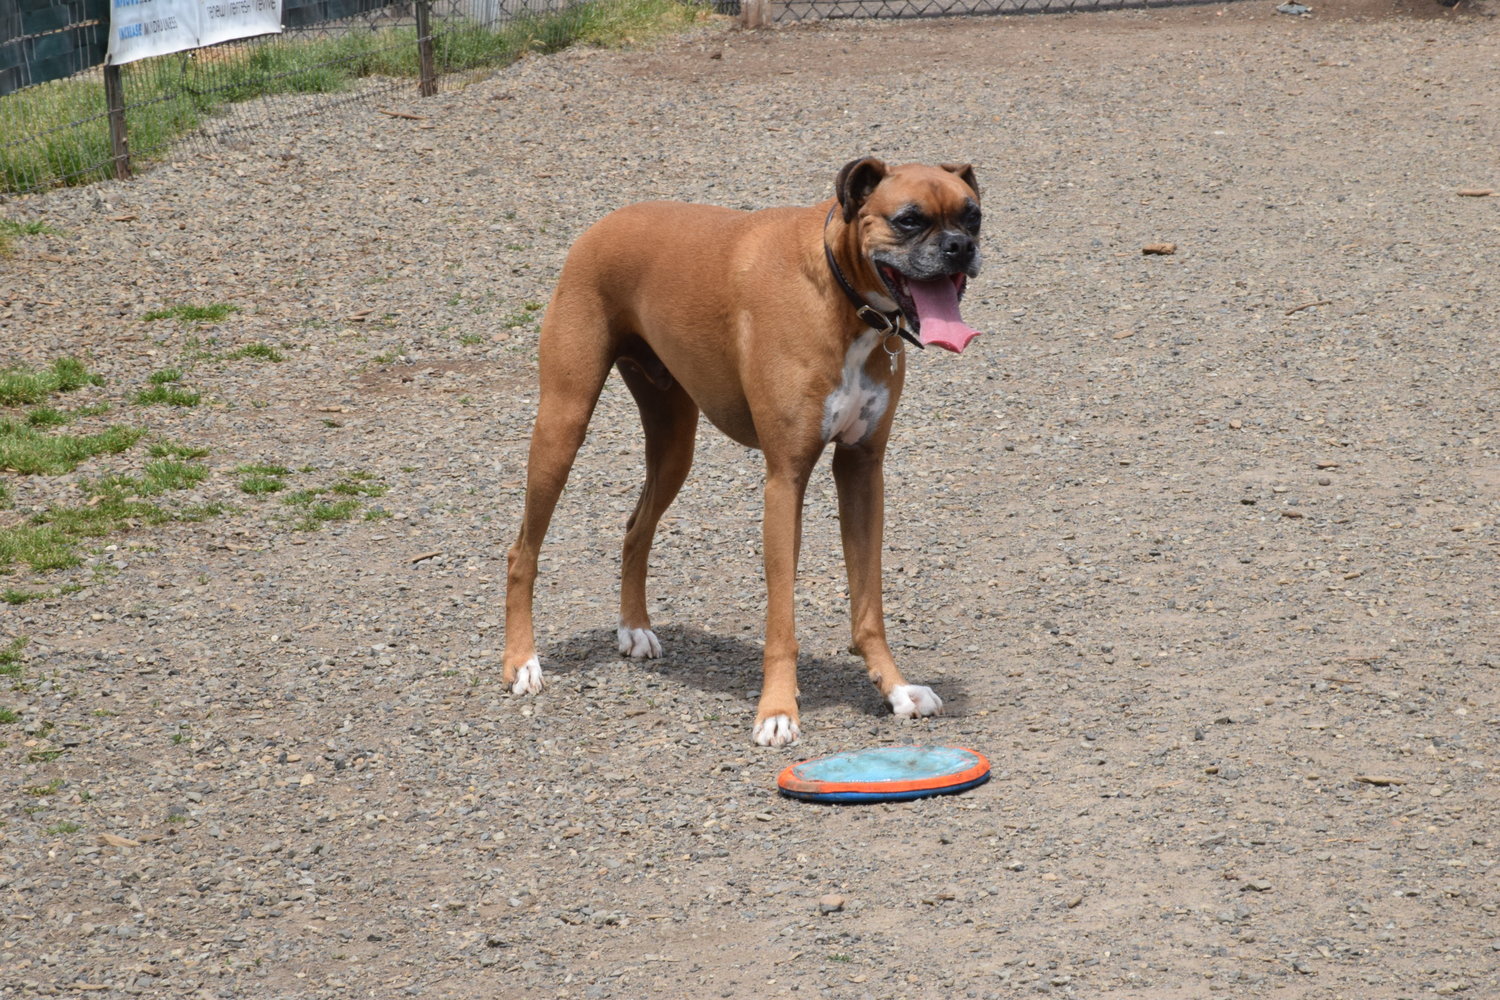 Bosco the Boxer stands by his prize, a disc toy, at Lucky Dog Park in Brush Prairie May 8.